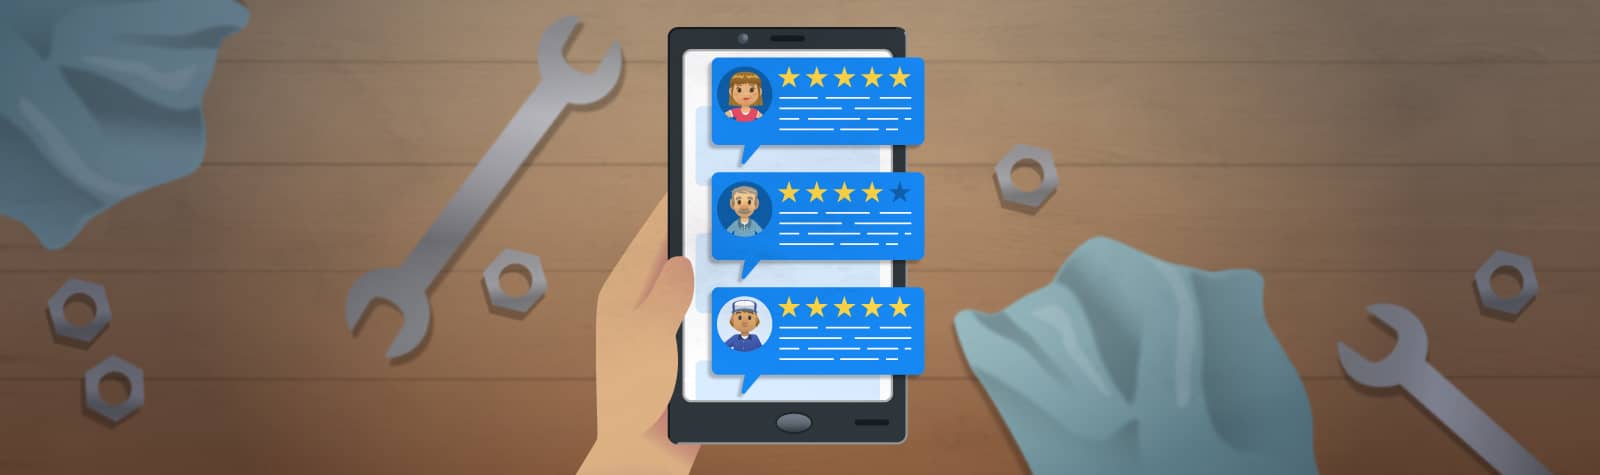 A Quick Guide to Online Reviews